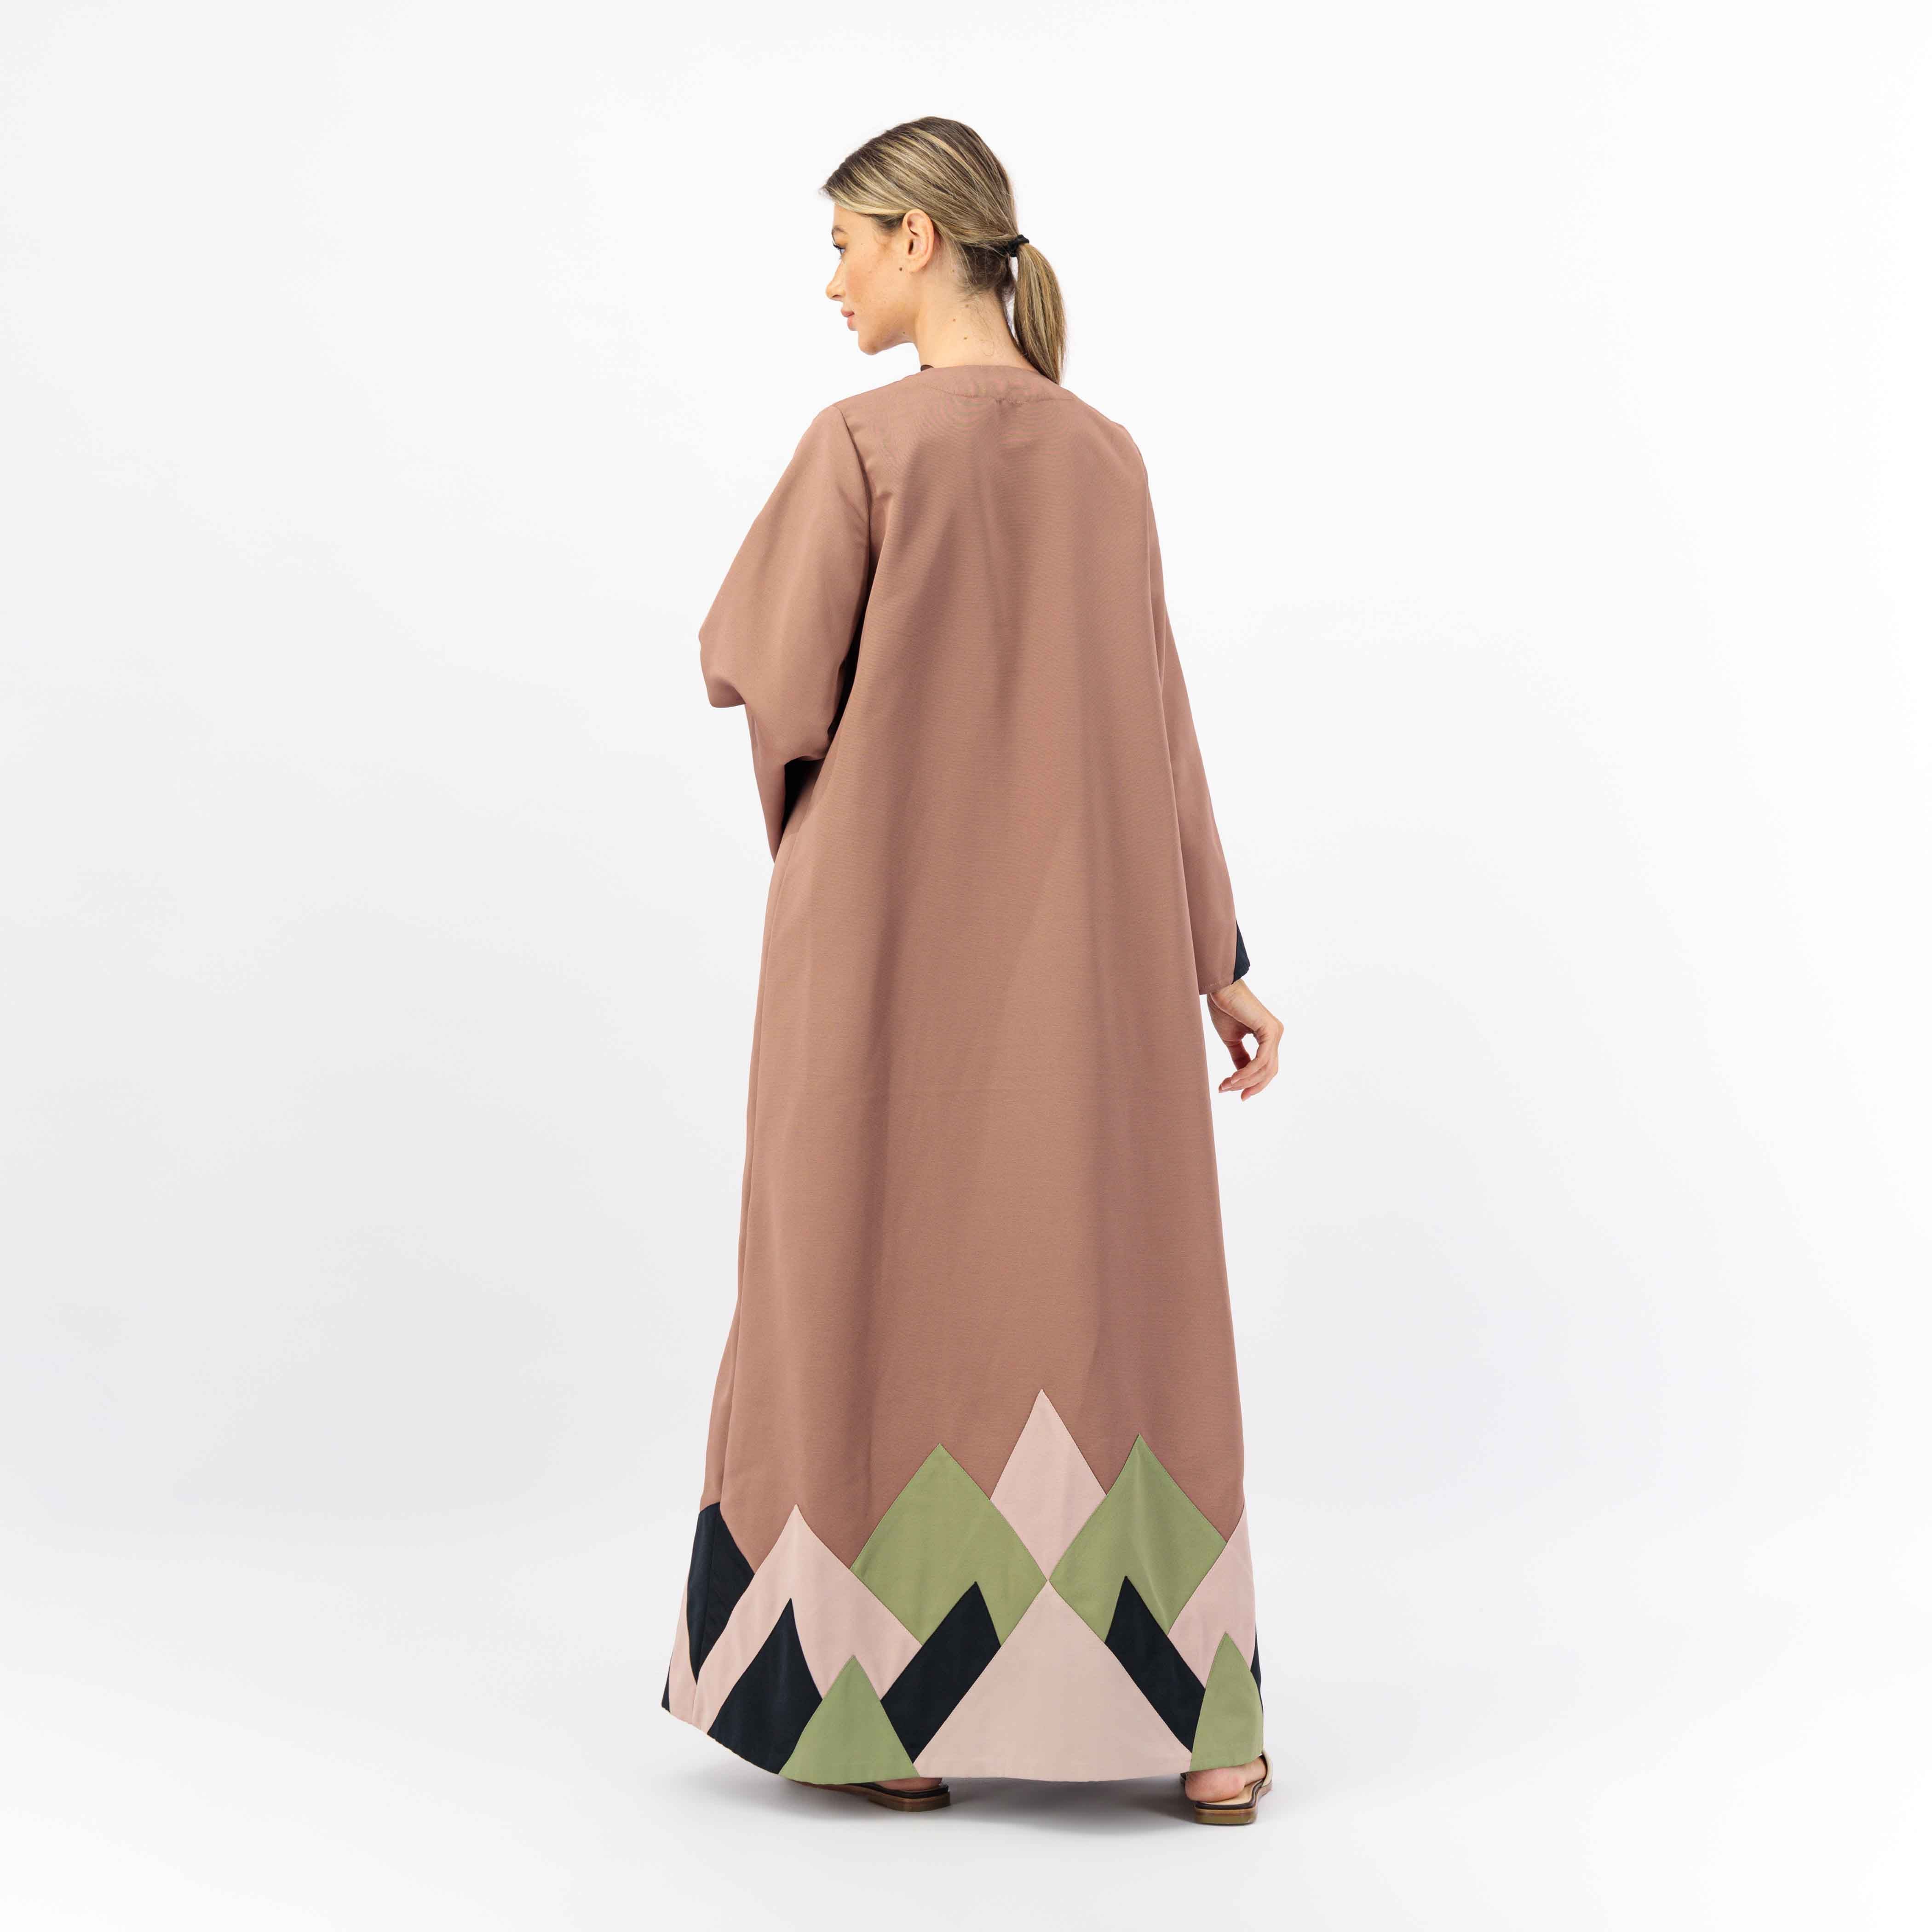 BROWN WOVEN FABRIC ABAYA WITH MOUNT PATCH